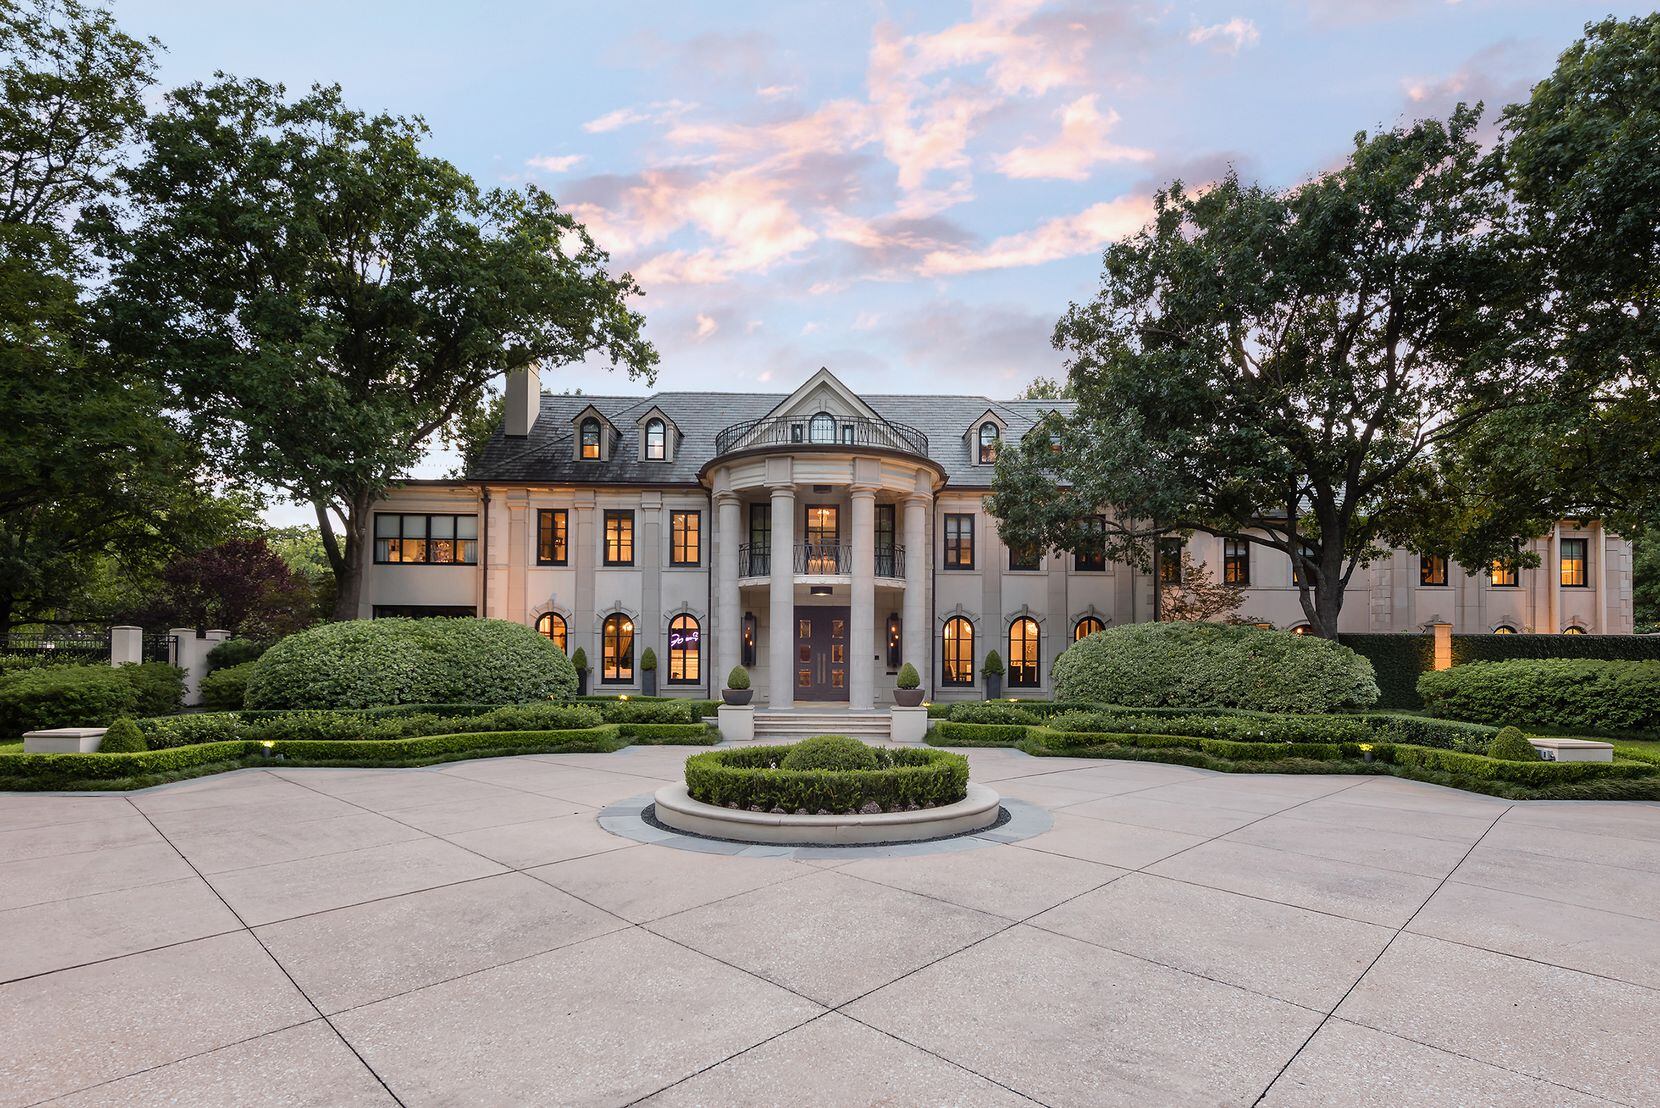 The nearly 2-acre estate at 6601 Hunters Glen Road, in the Volk Estates neighborhood, was renovated throughout.